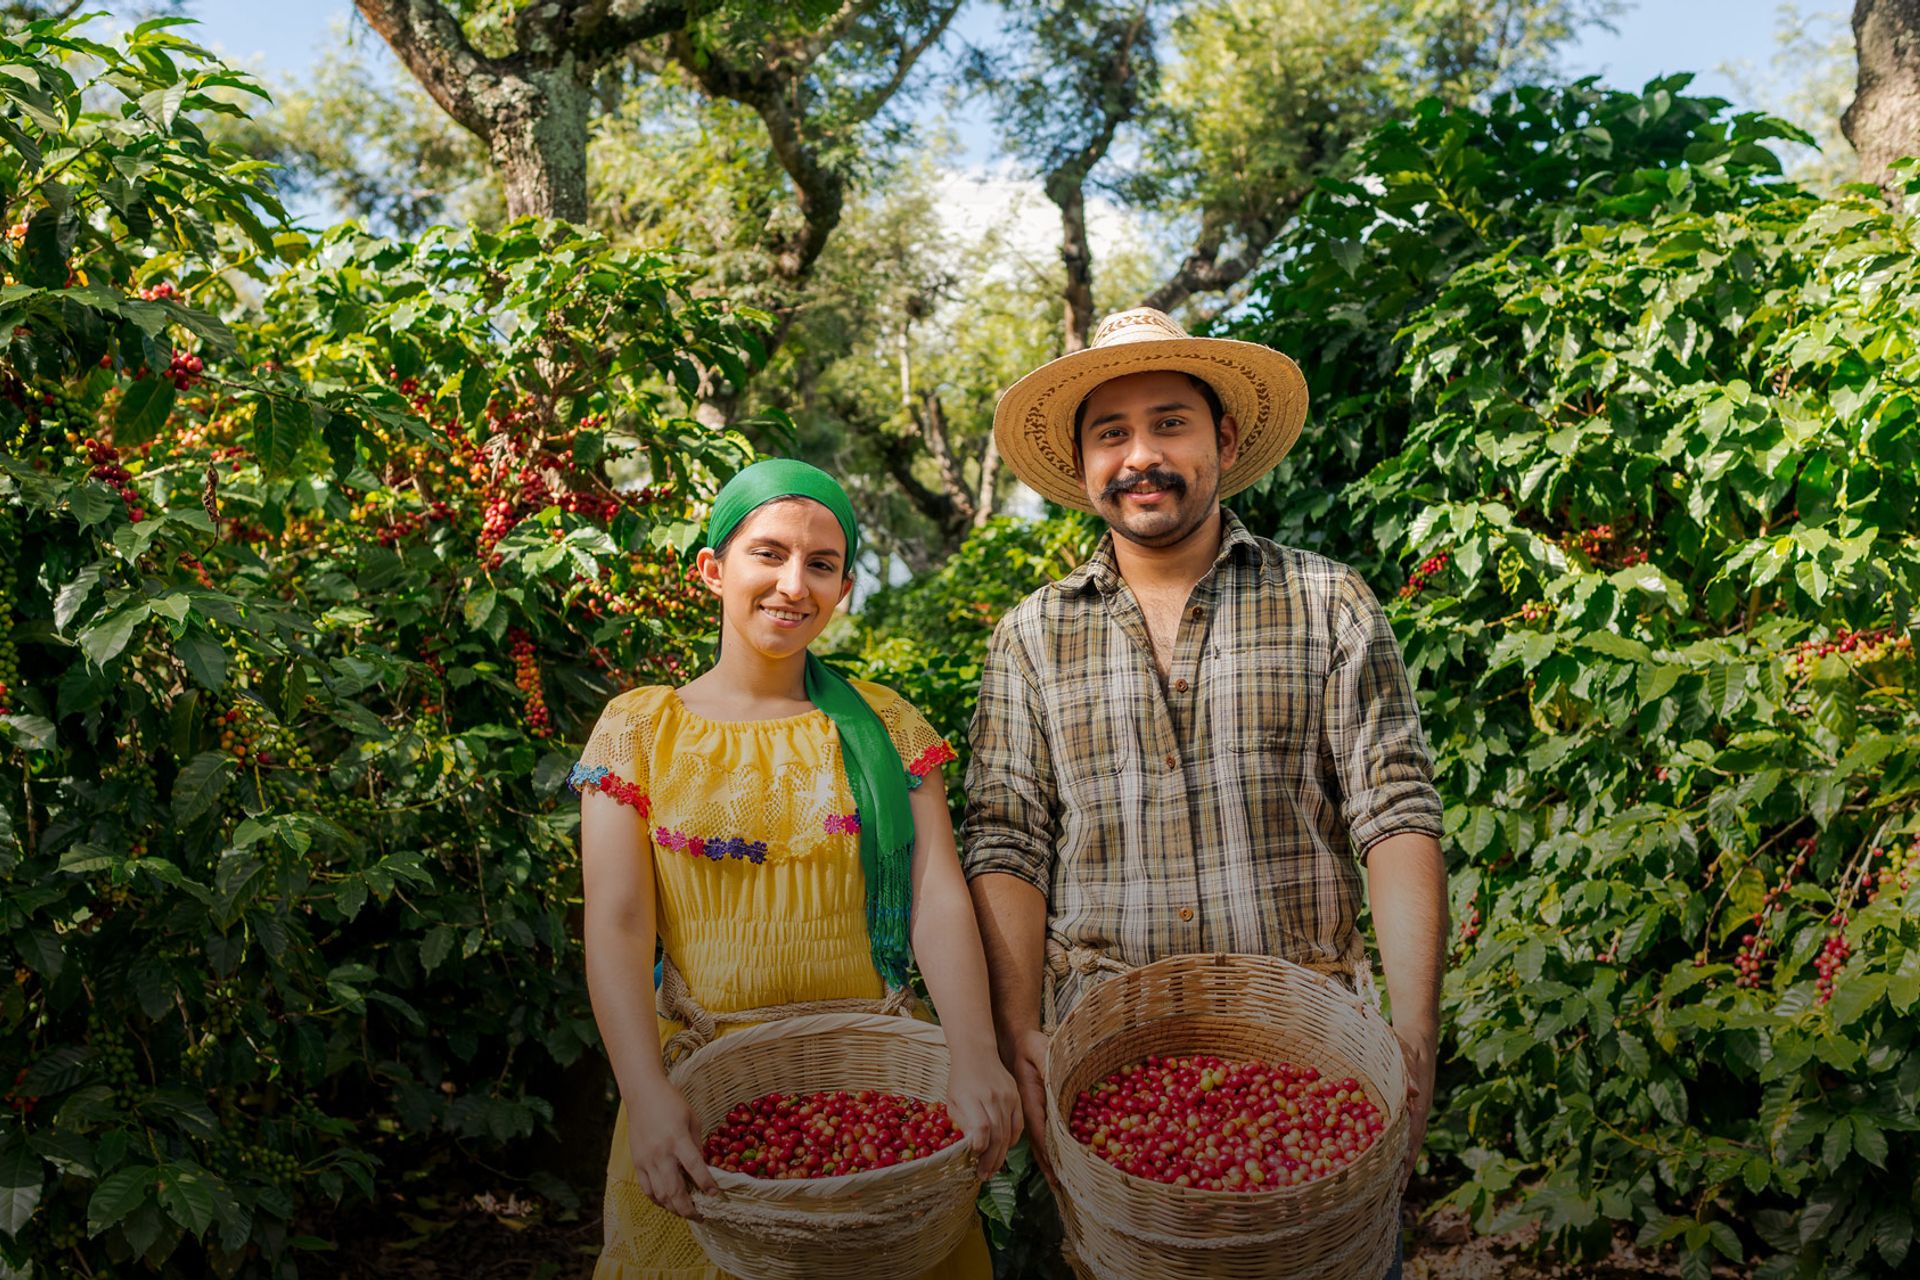 Image of two farm workers holding baskets of harvested fruit